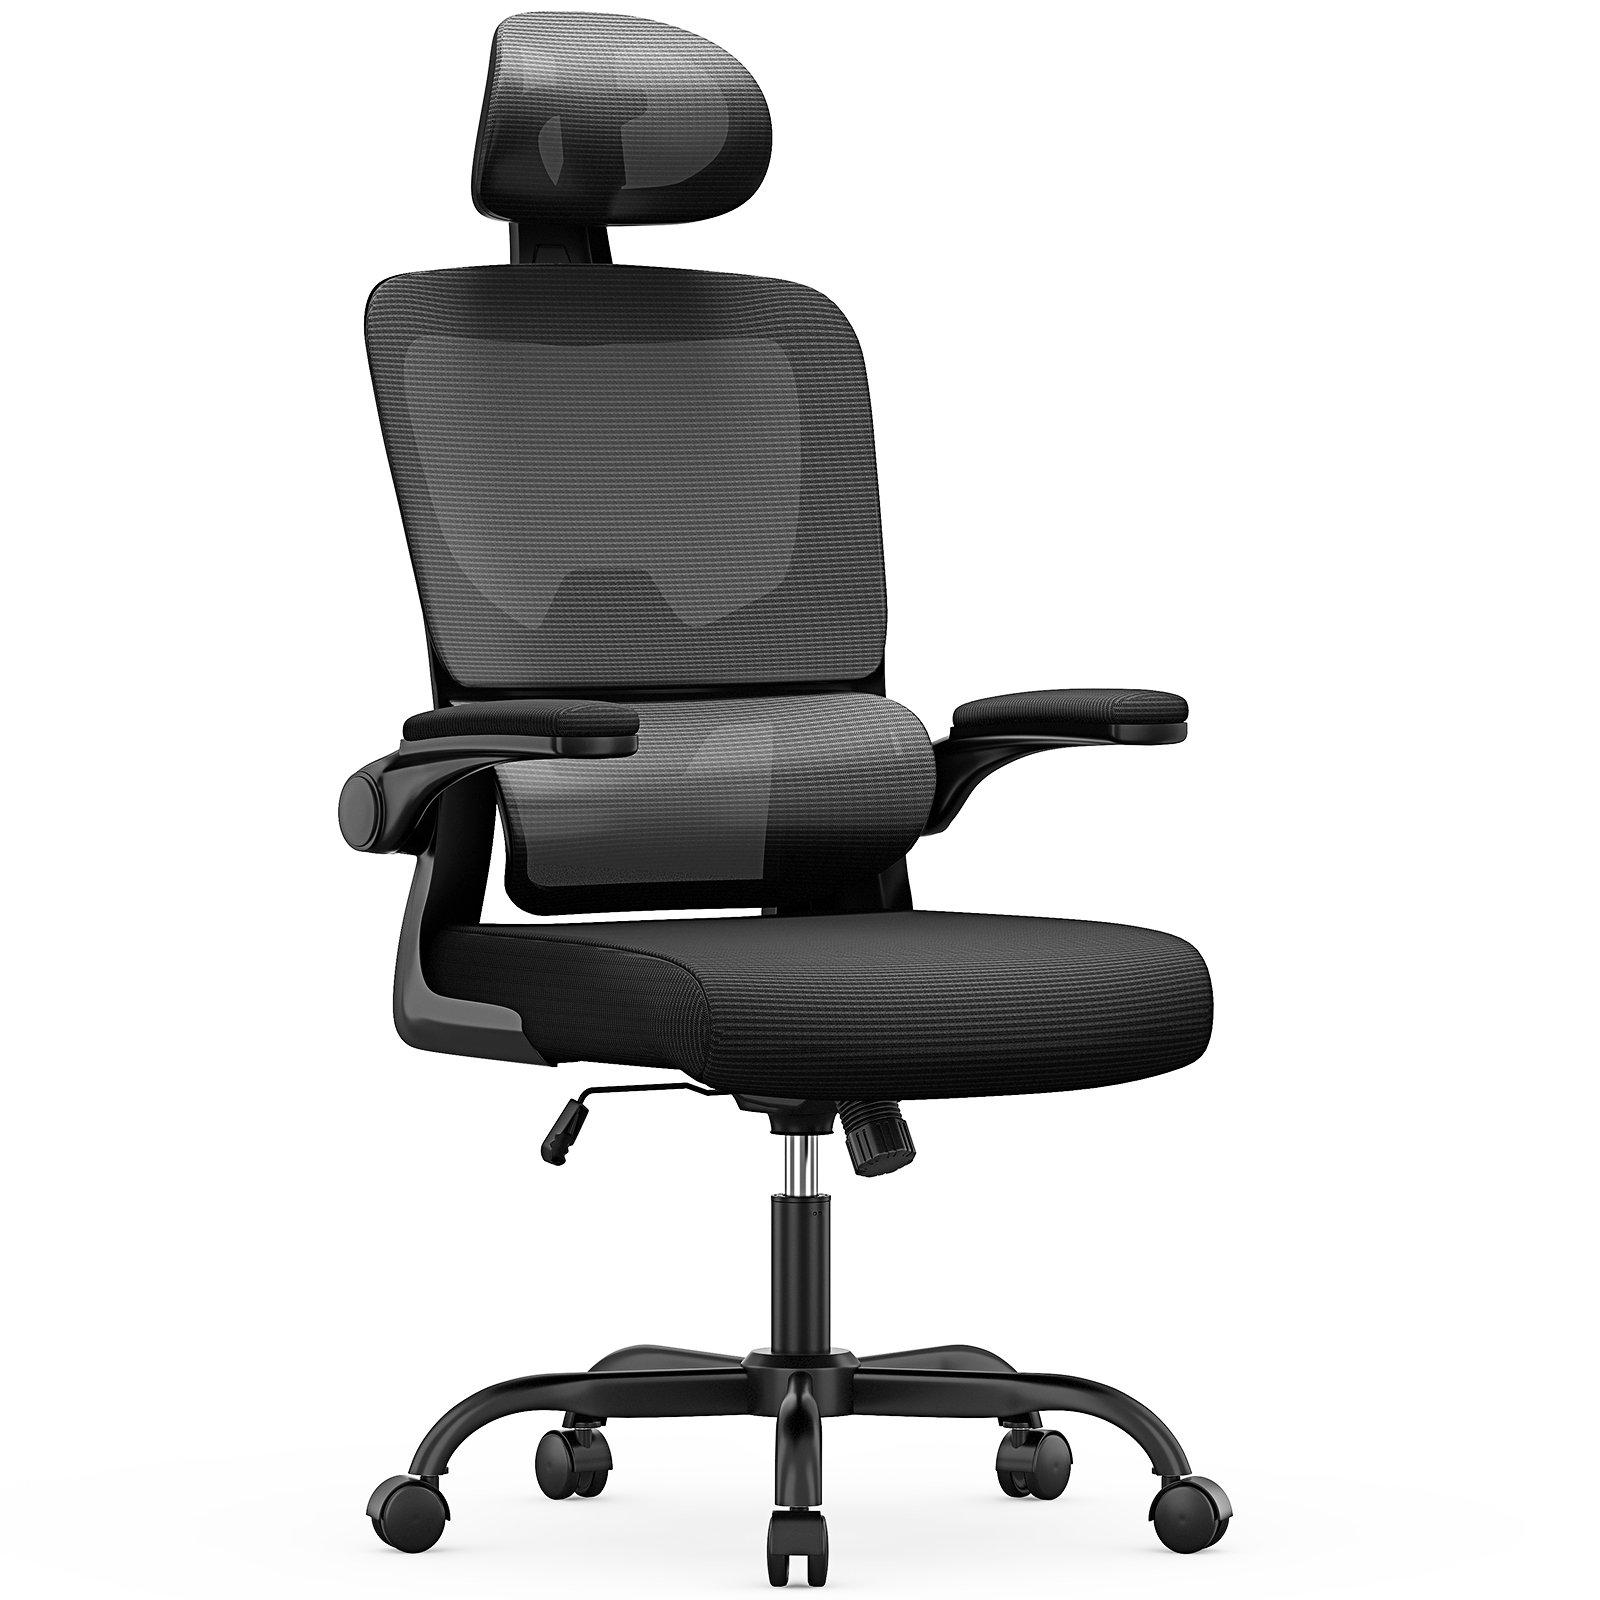 Large Ergonomic Desk Chairs,High Back Computer Chair with Lumbar Support, Breathable Mesh, Adjustabl